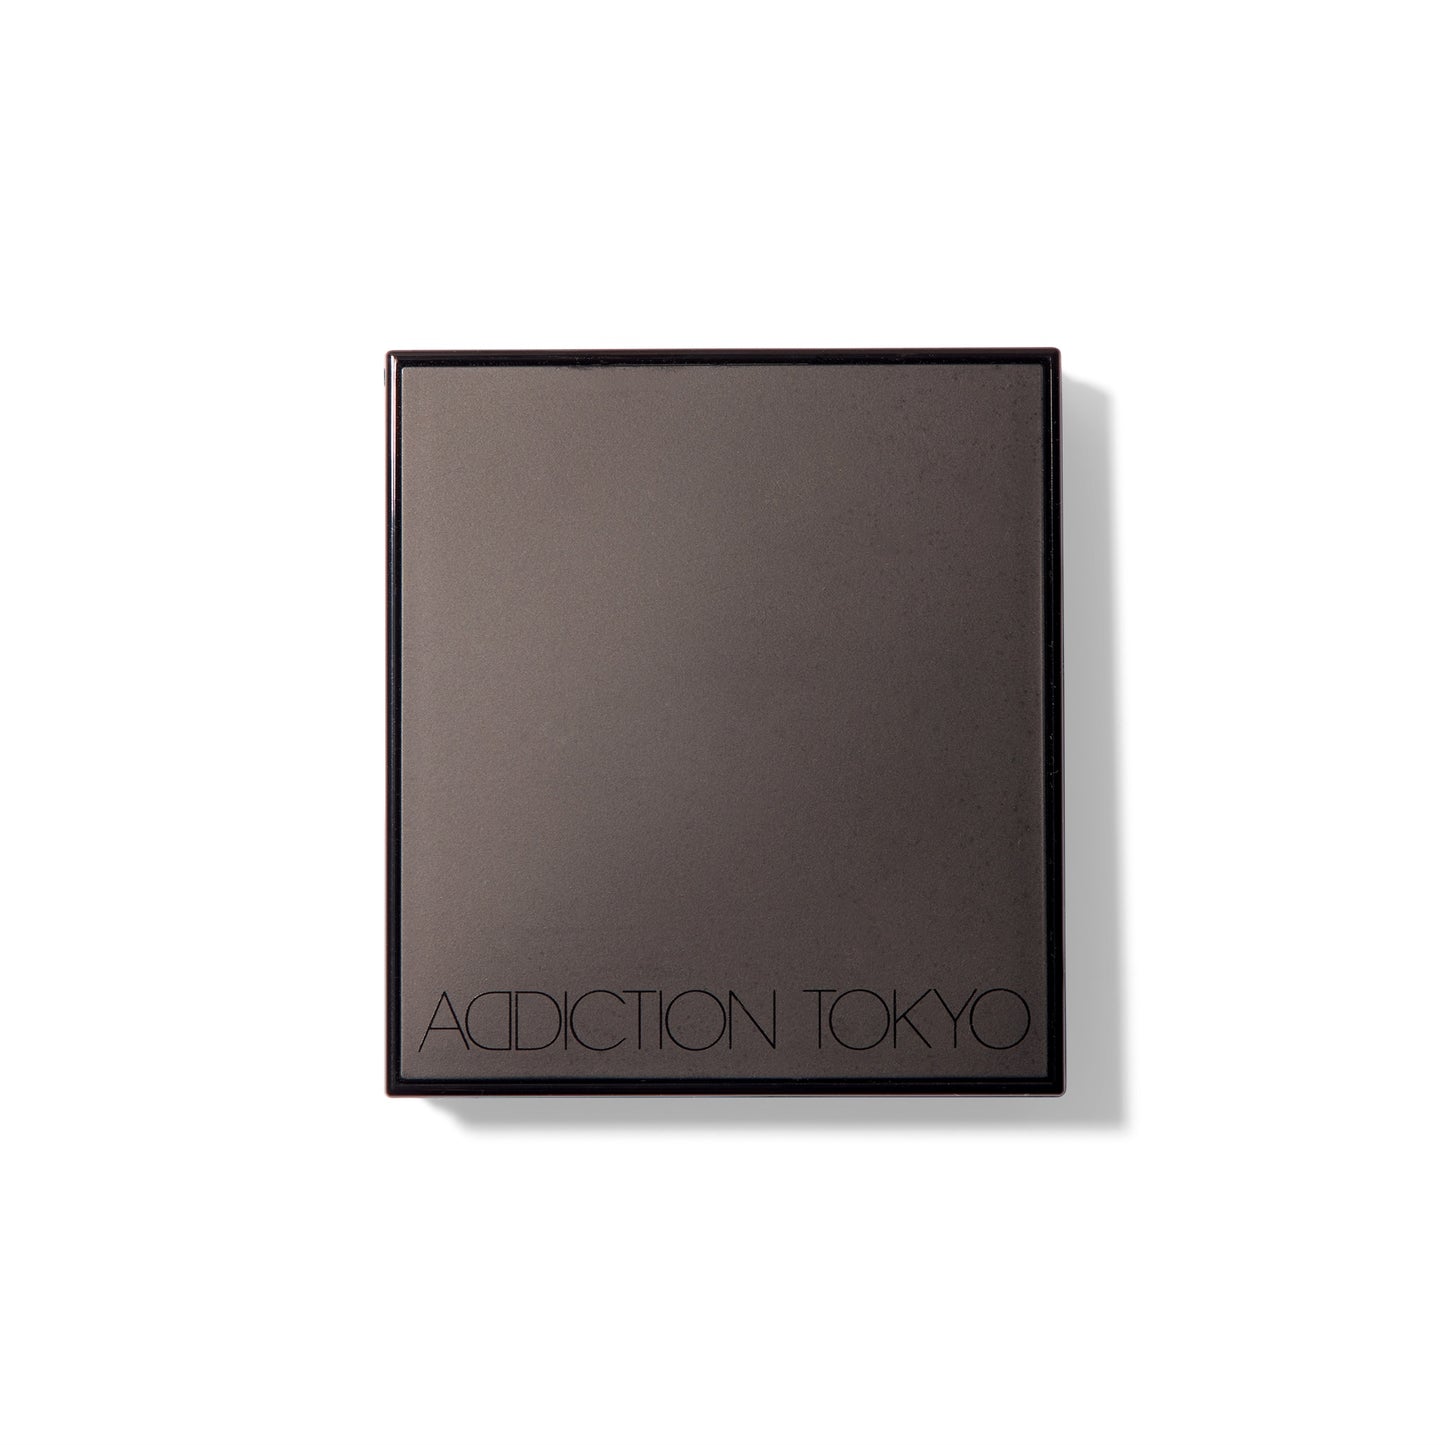 The black Compact Case I, closed, with Addiction Tokyo logo on the front. 